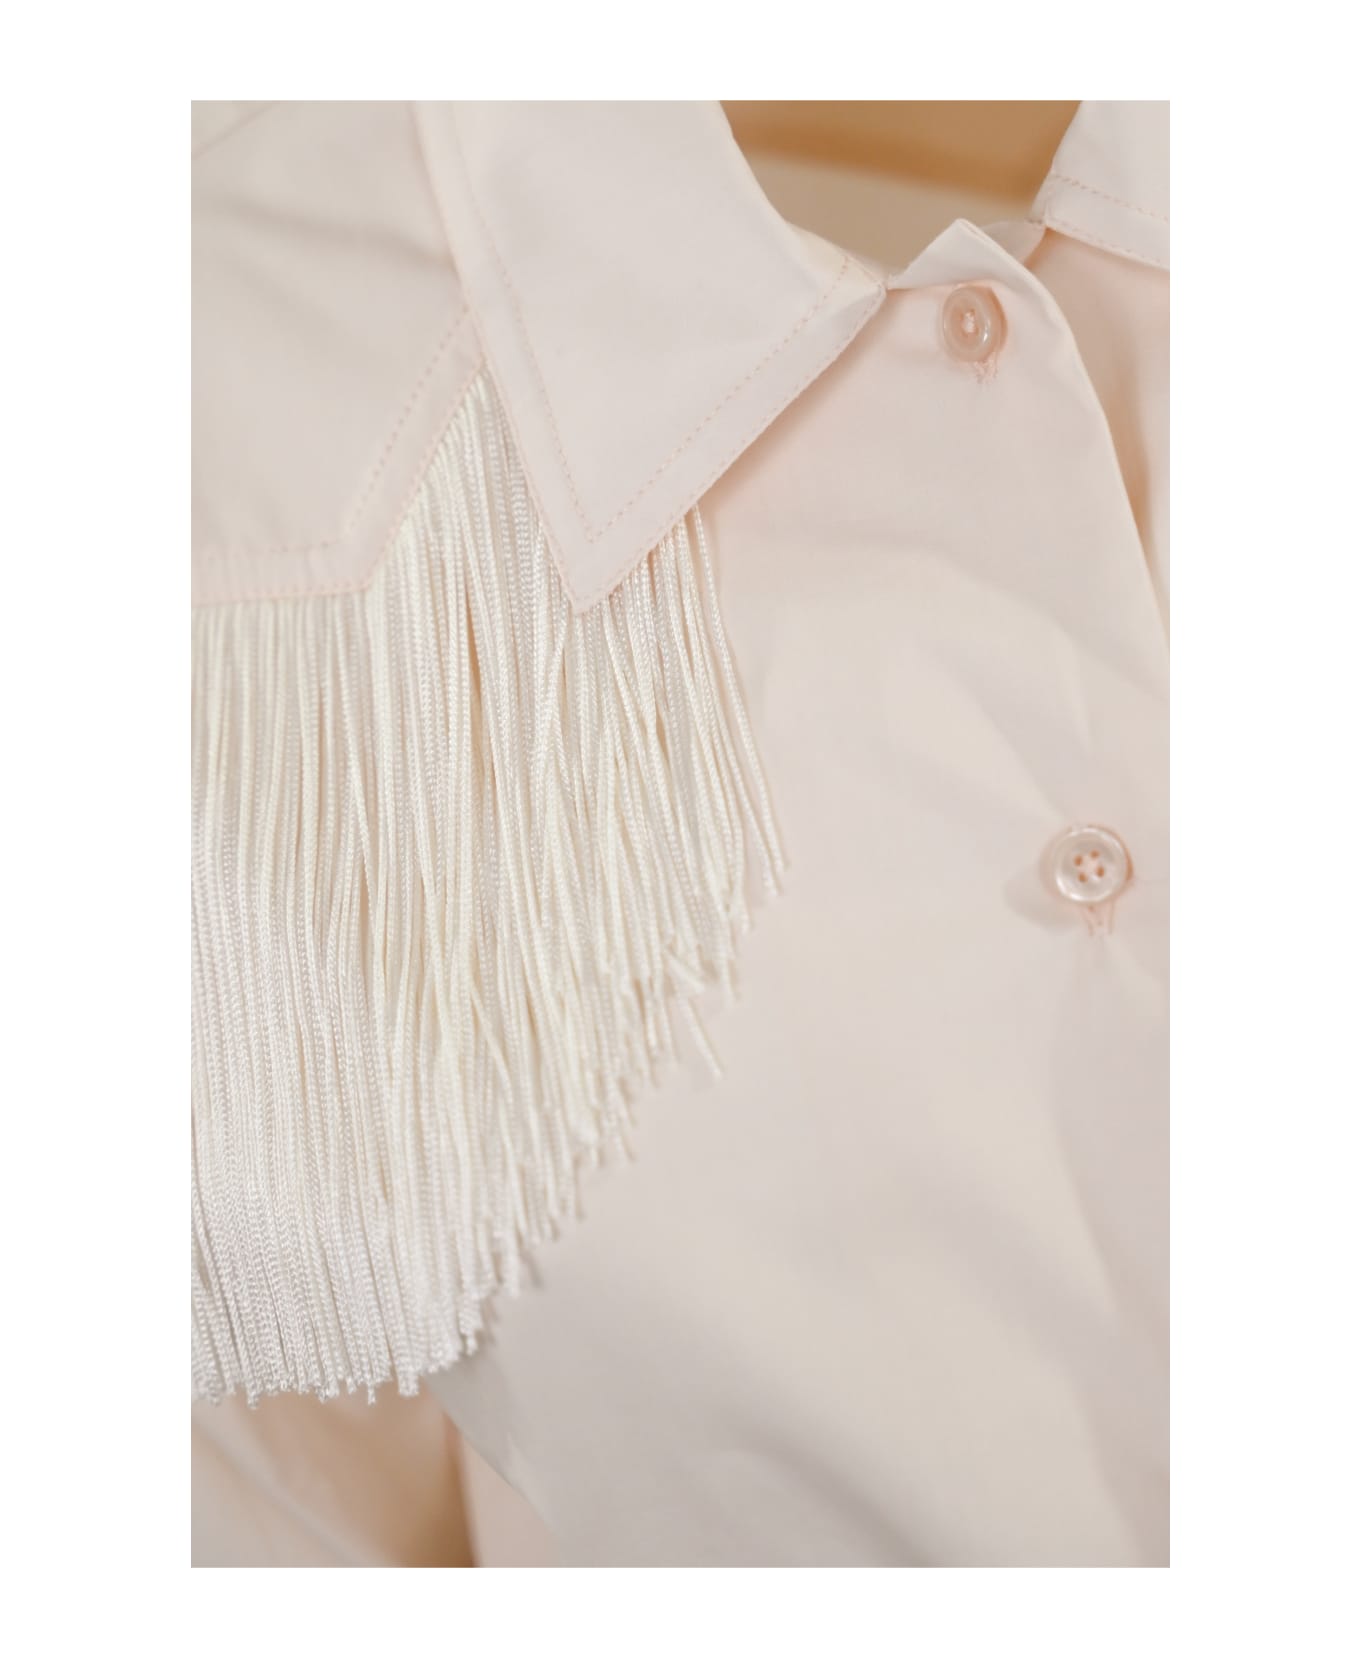 Pinko Cropped Shirt With Fringes - Rosa